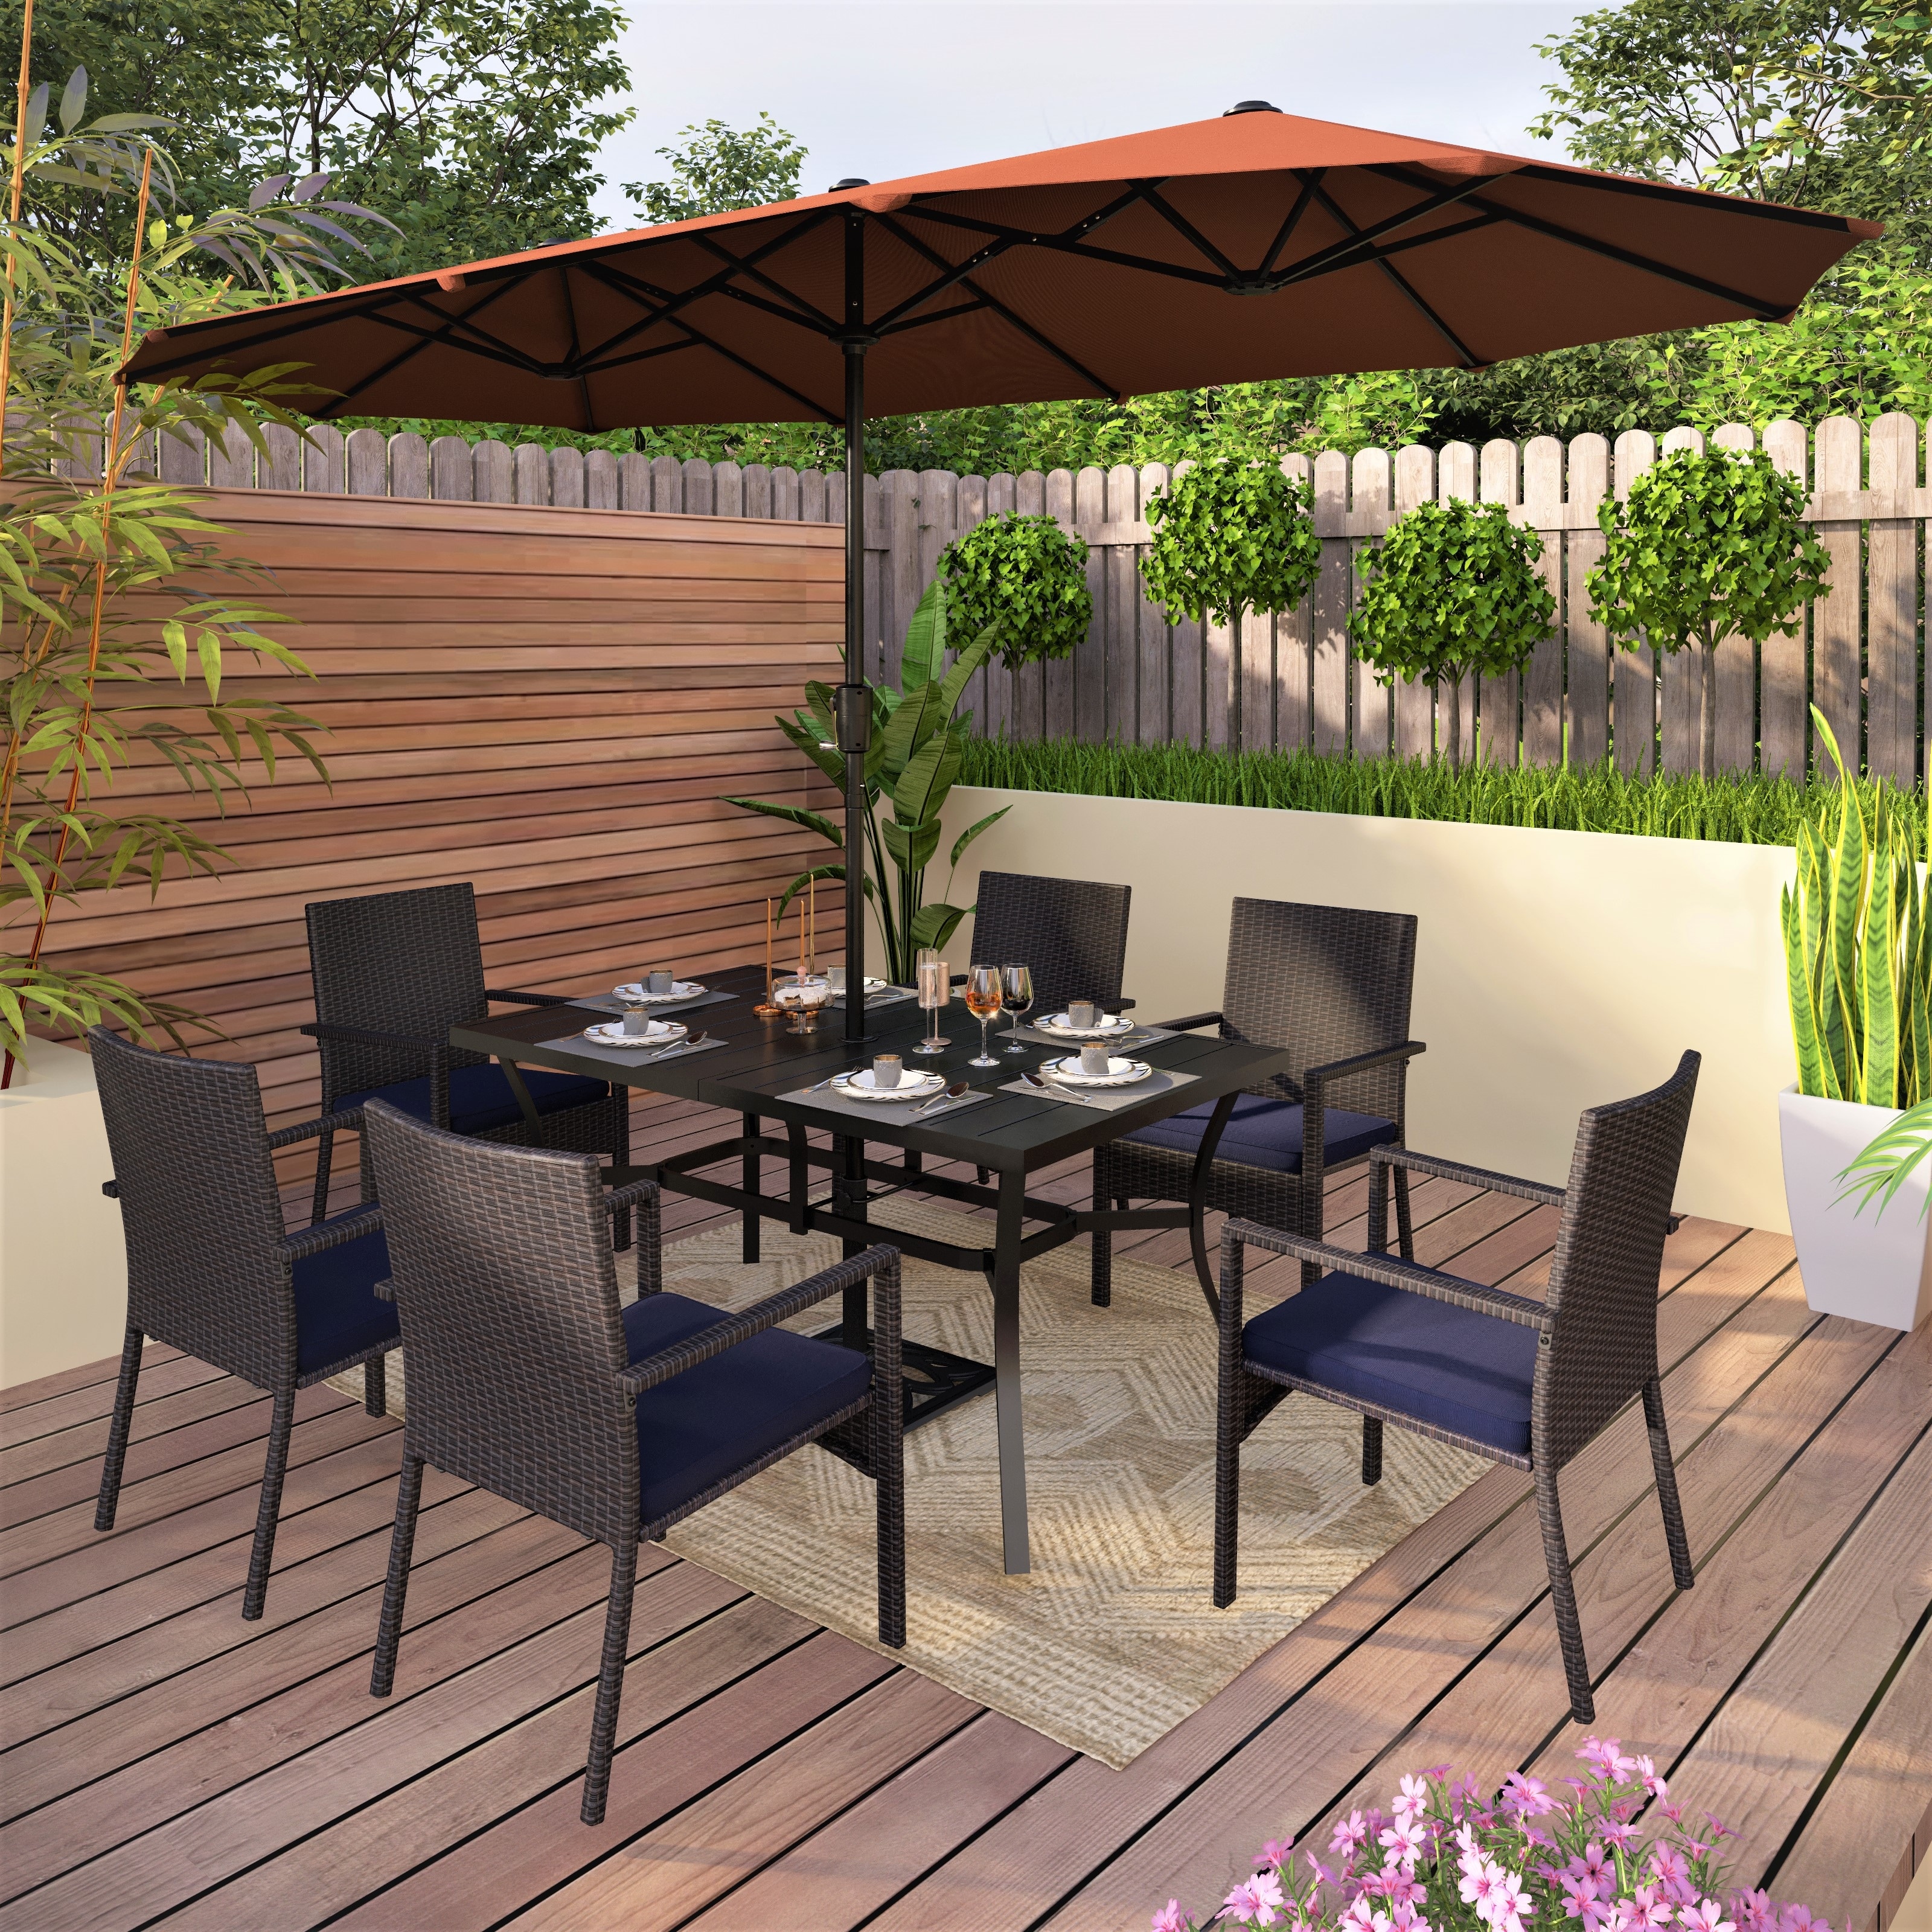 7/8 Pieces Outdoor Patio Dining Set  6 Pe Rattan Chairs With Cushions And 1 Rectangle Metal Table